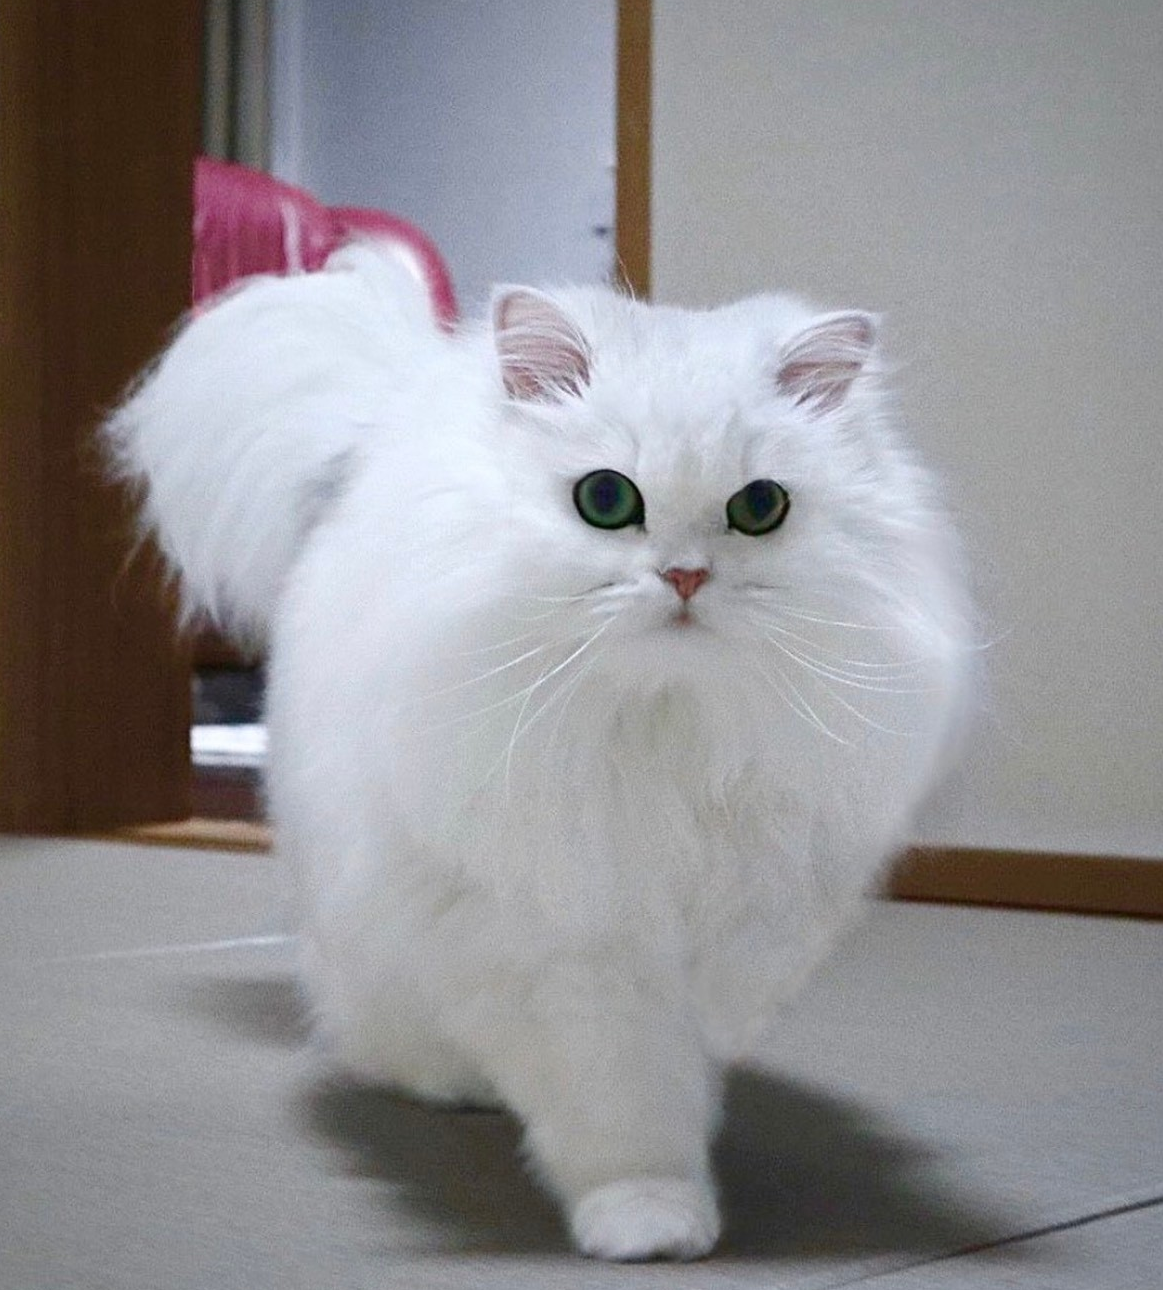 Behold the Beauty: Introducing the Most Stunning Cat Angel You’ve Ever Seen.NgocChau